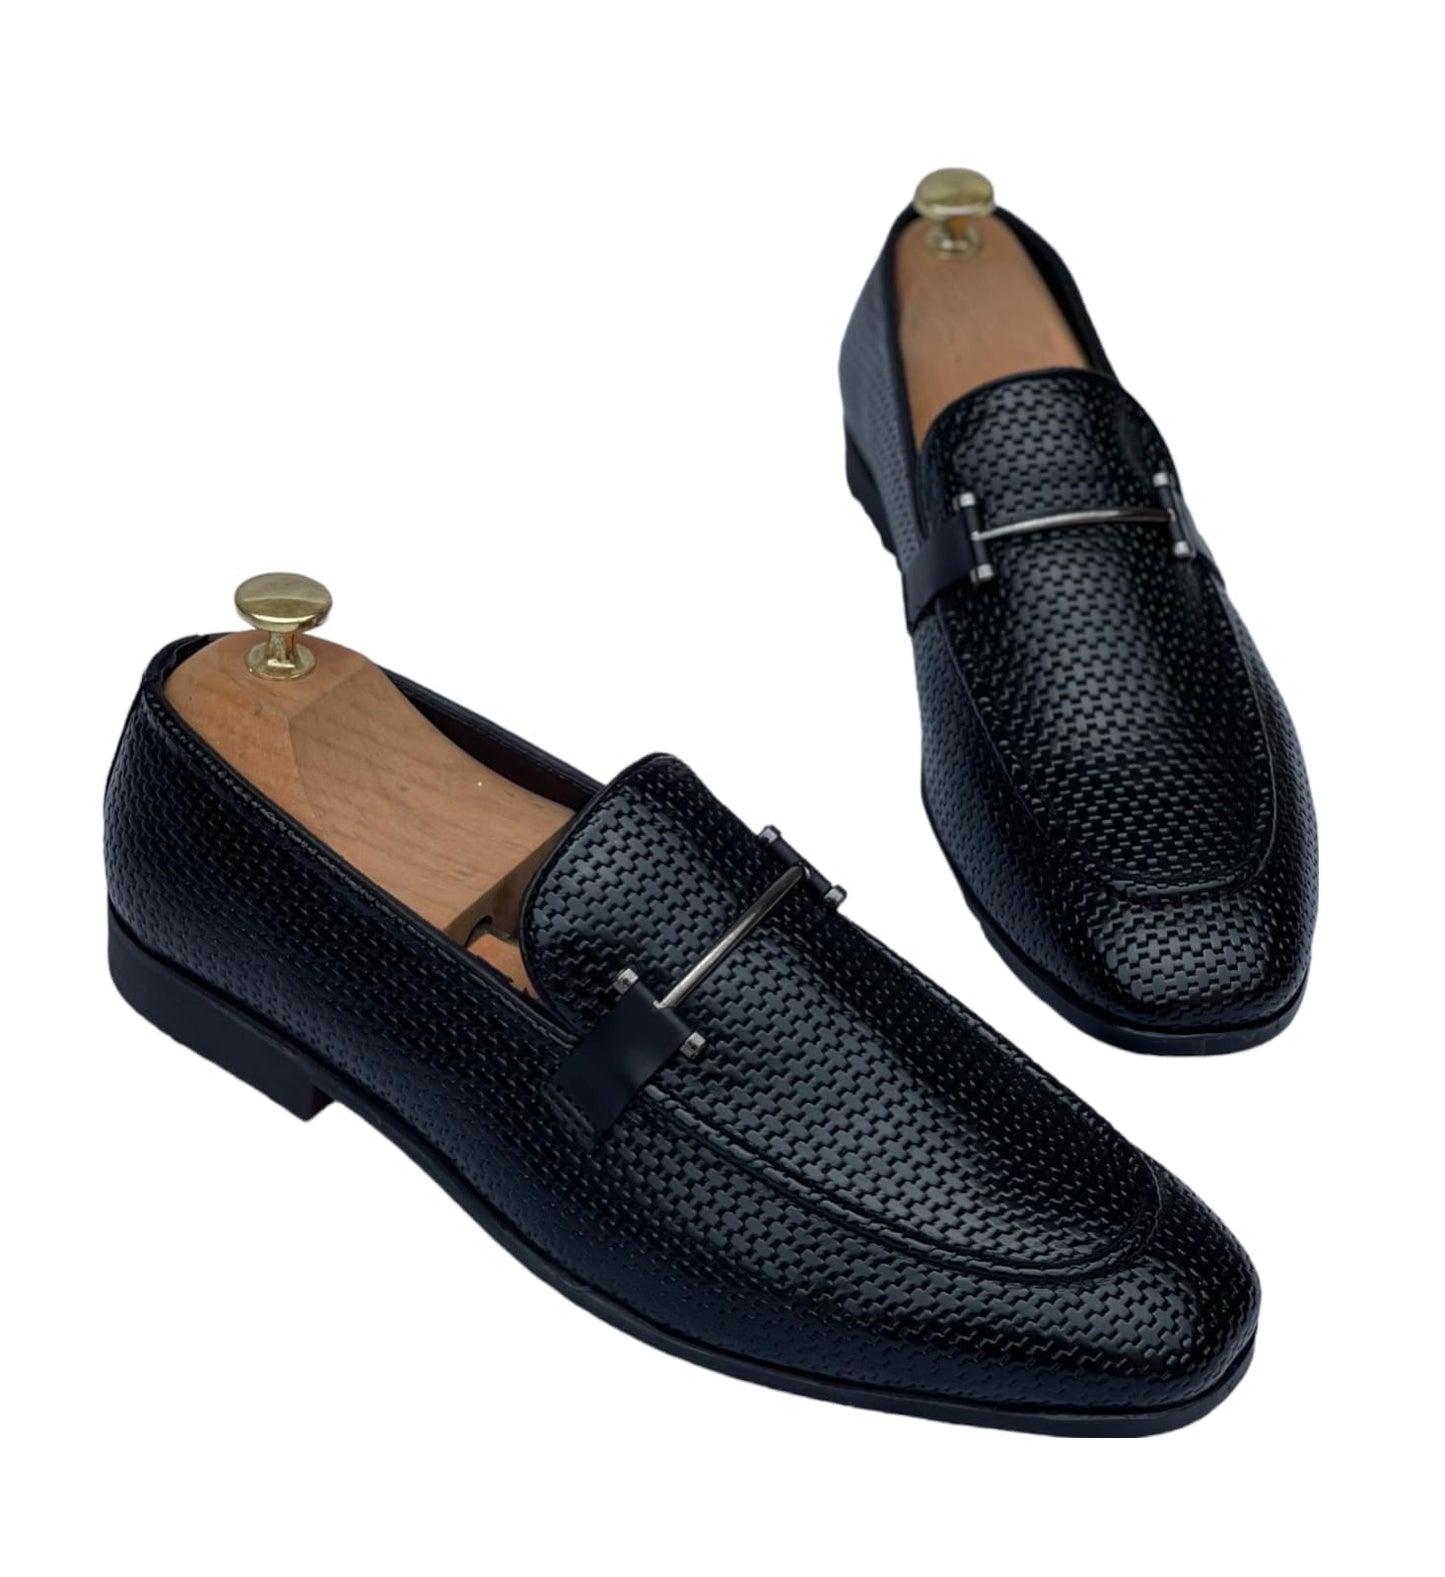 Buy New Fashion Loafers For Men Party and Casual Wear - Sunglassesmart